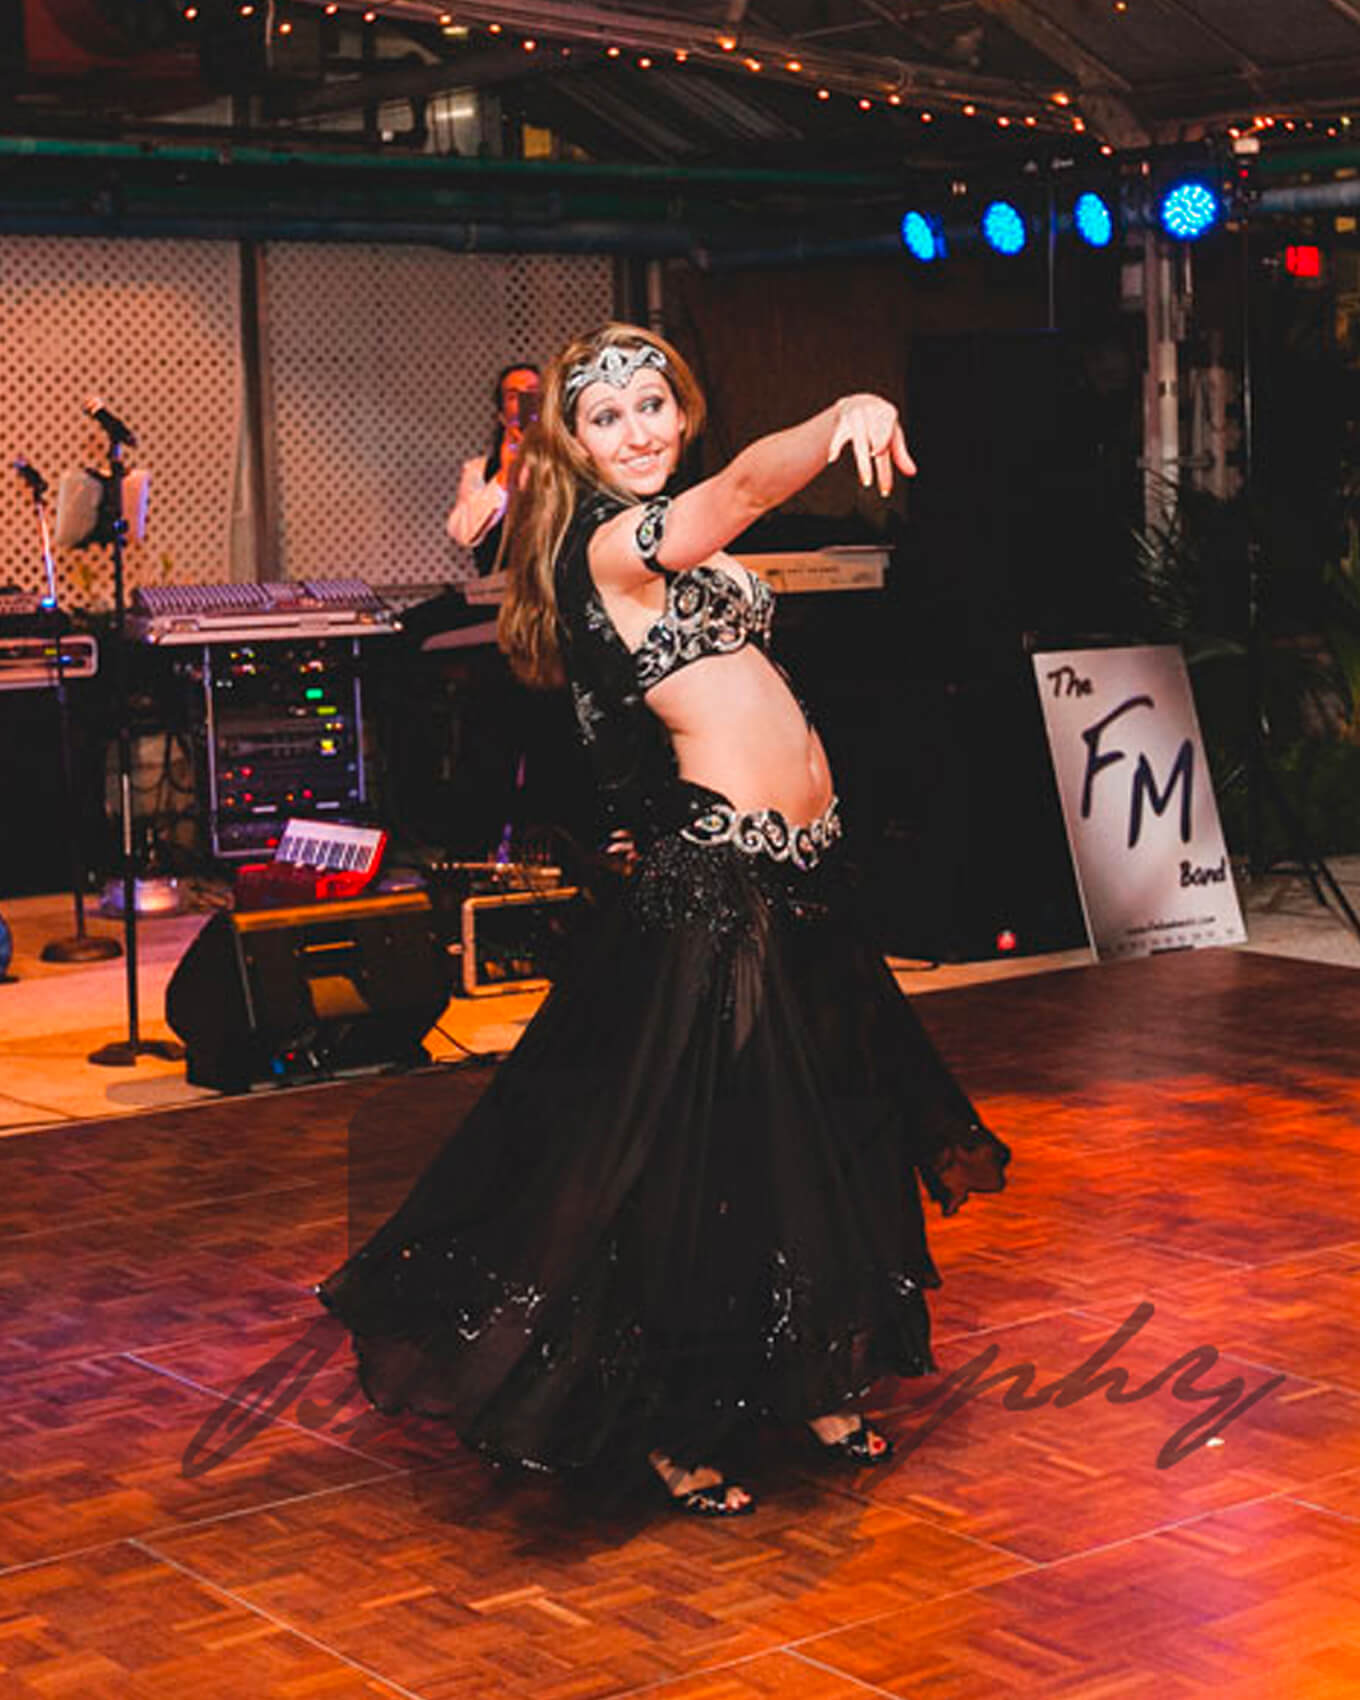 Donna performs a live belly dancing show at an event